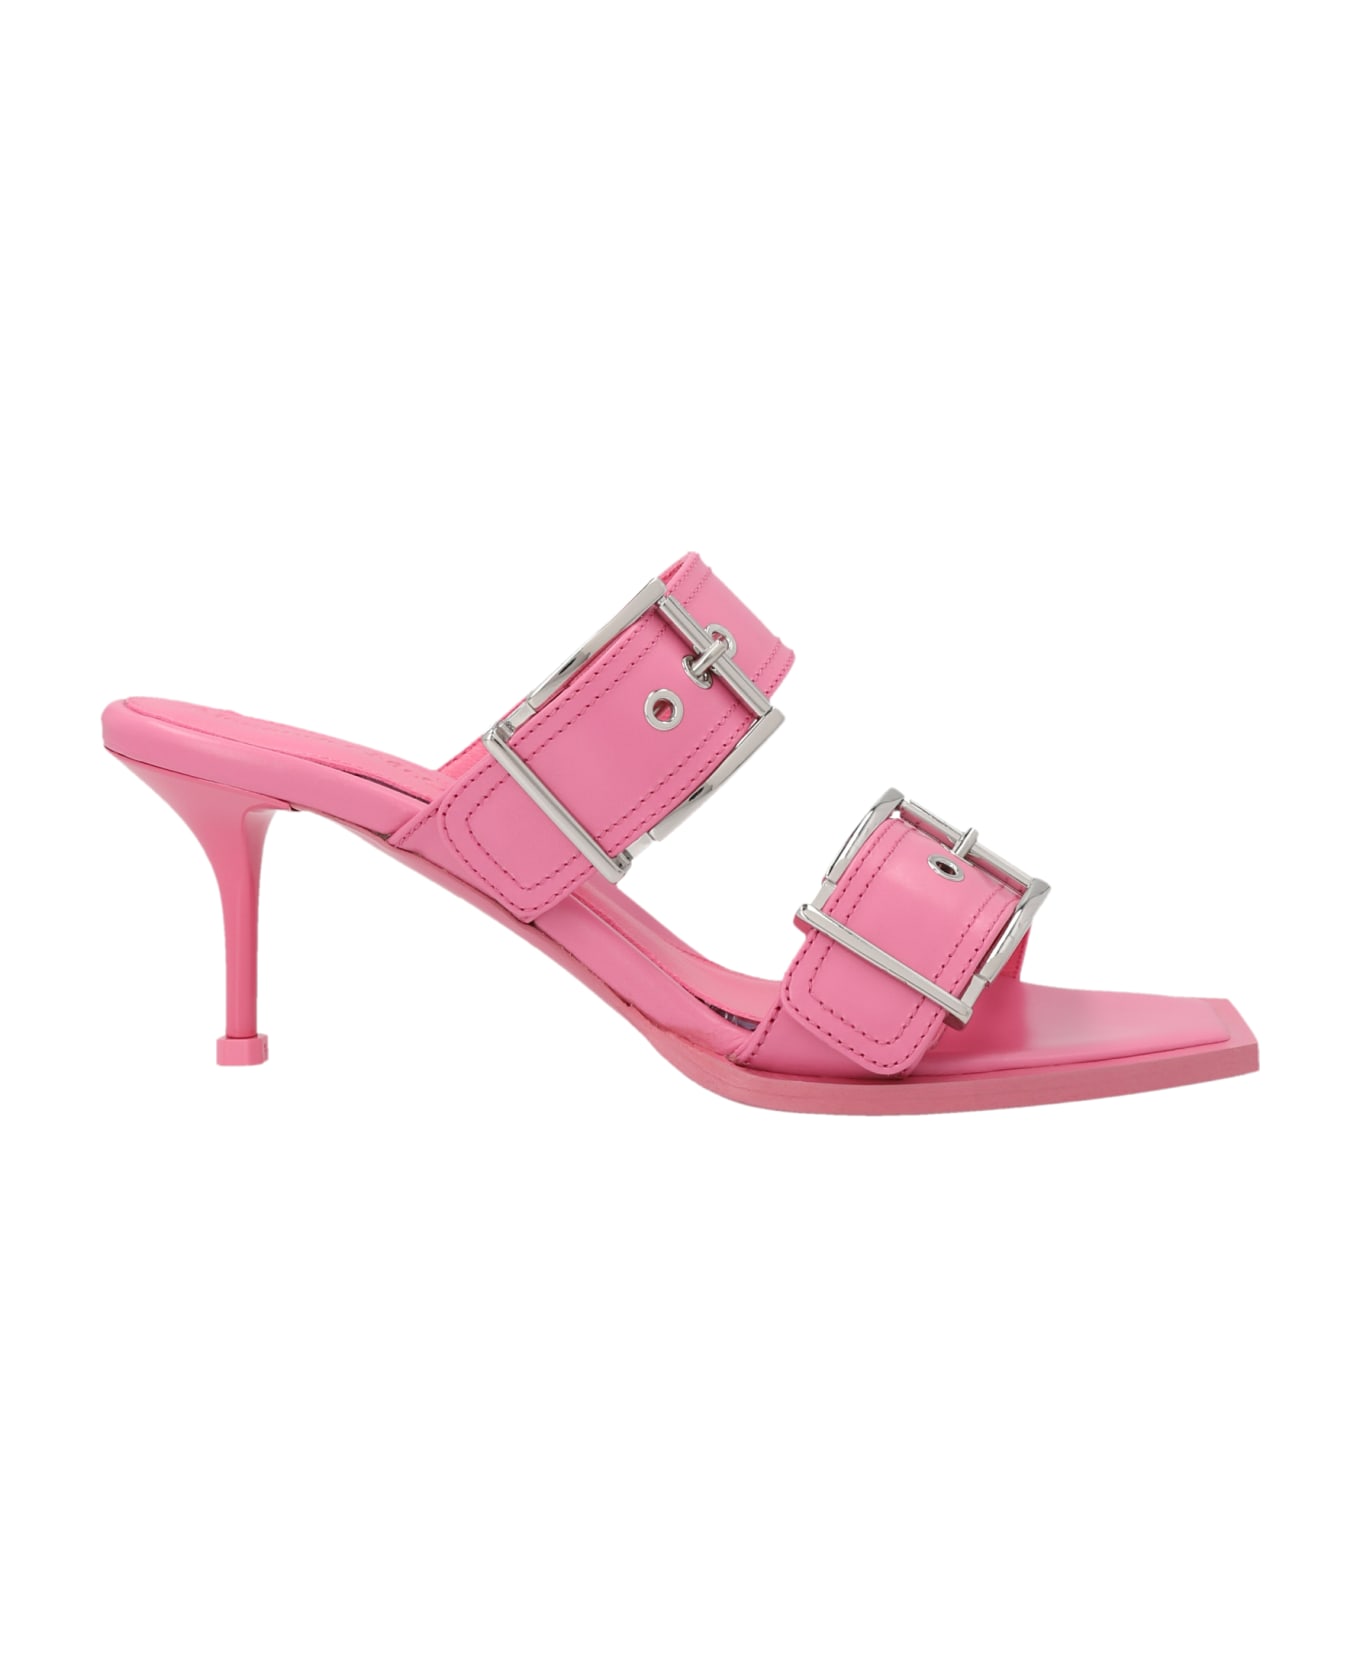 Alexander McQueen Pink Punk Sandal With Double Buckle - Rosa